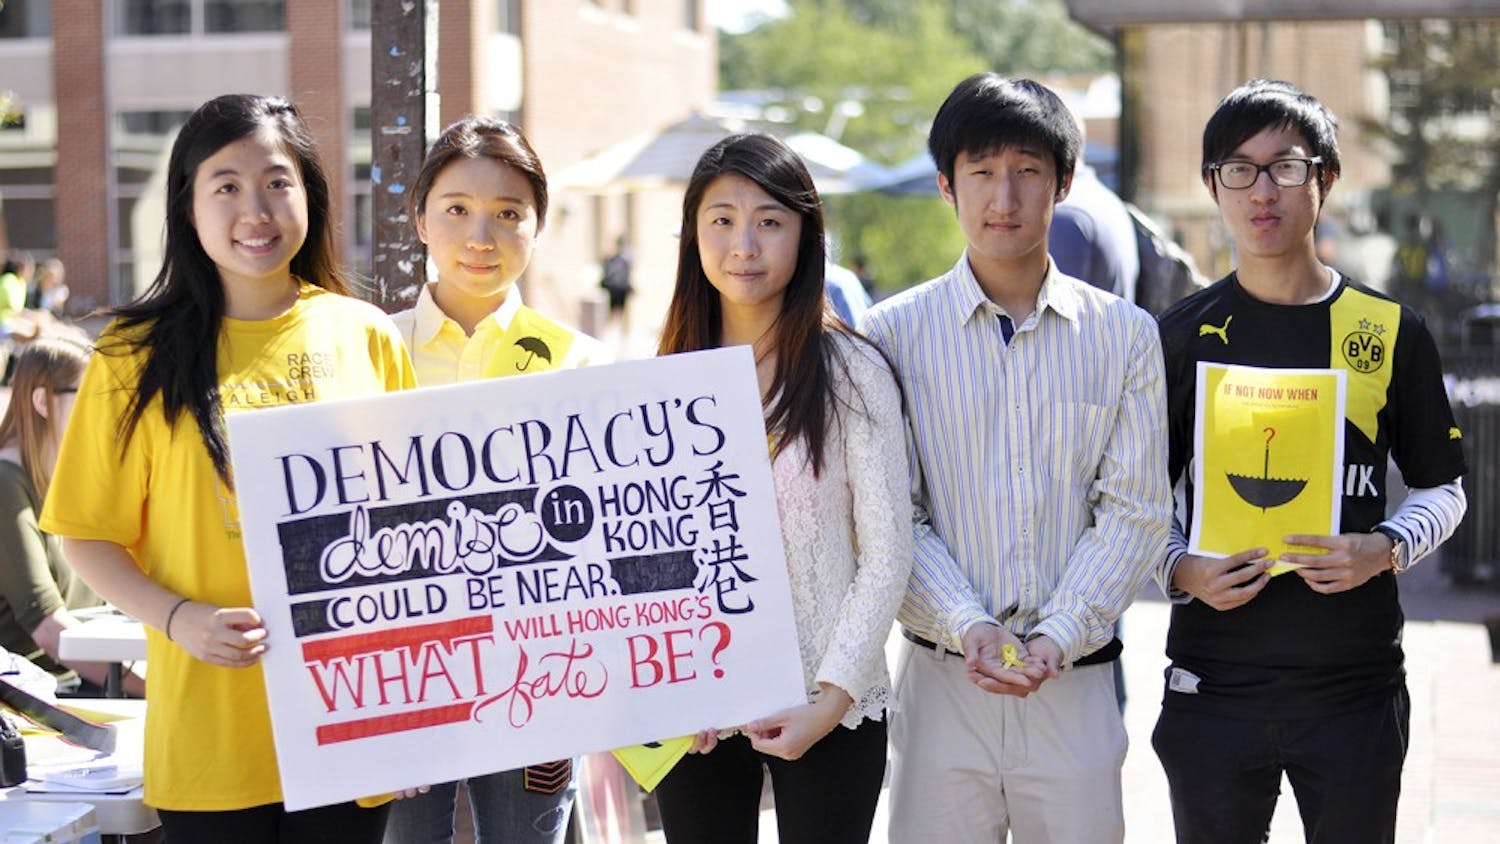 From left to right, Sam Lin, Kathleen Cheng, Christie Leung, Tim Kang, and Kiko Wong stand together to support Hong Kong, sponsored by the Asian Students Association at UNC. Christie and Kiko are students from Hong Kong studying at UNC through the GLOBE program, Sam and Tim are students at UNC and members of the Asian Students Association, and Kathleen graduated from UNC with the Class of 2014.